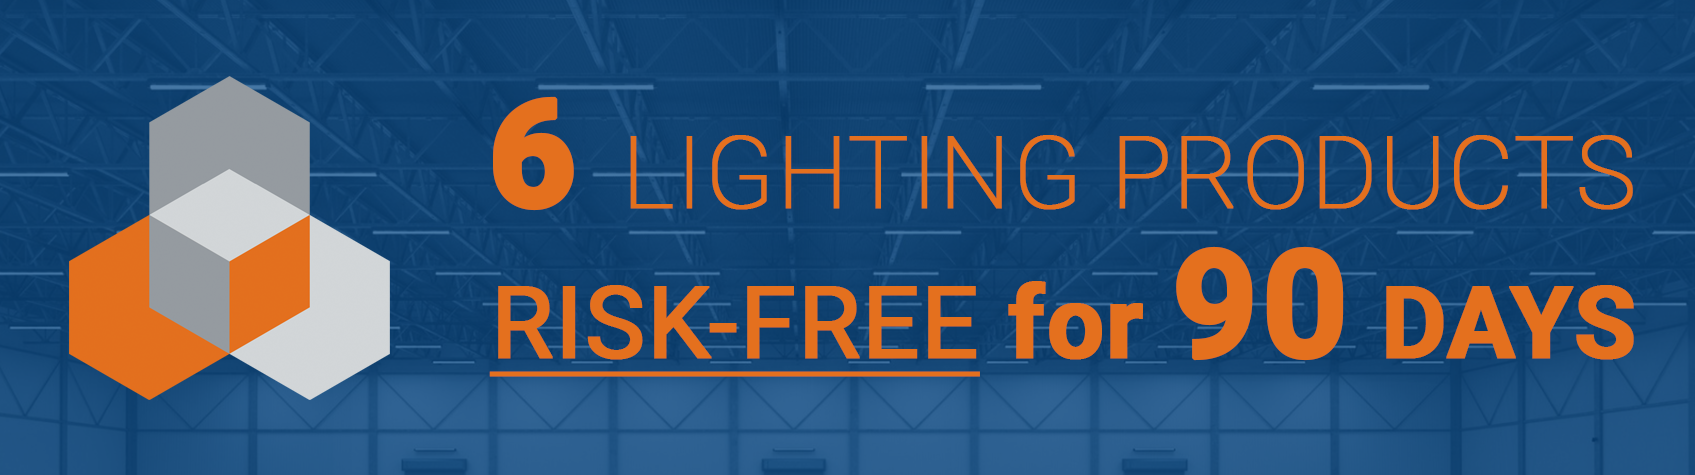 Try up to 6 lighting products from SMC risk-free for 90 days!